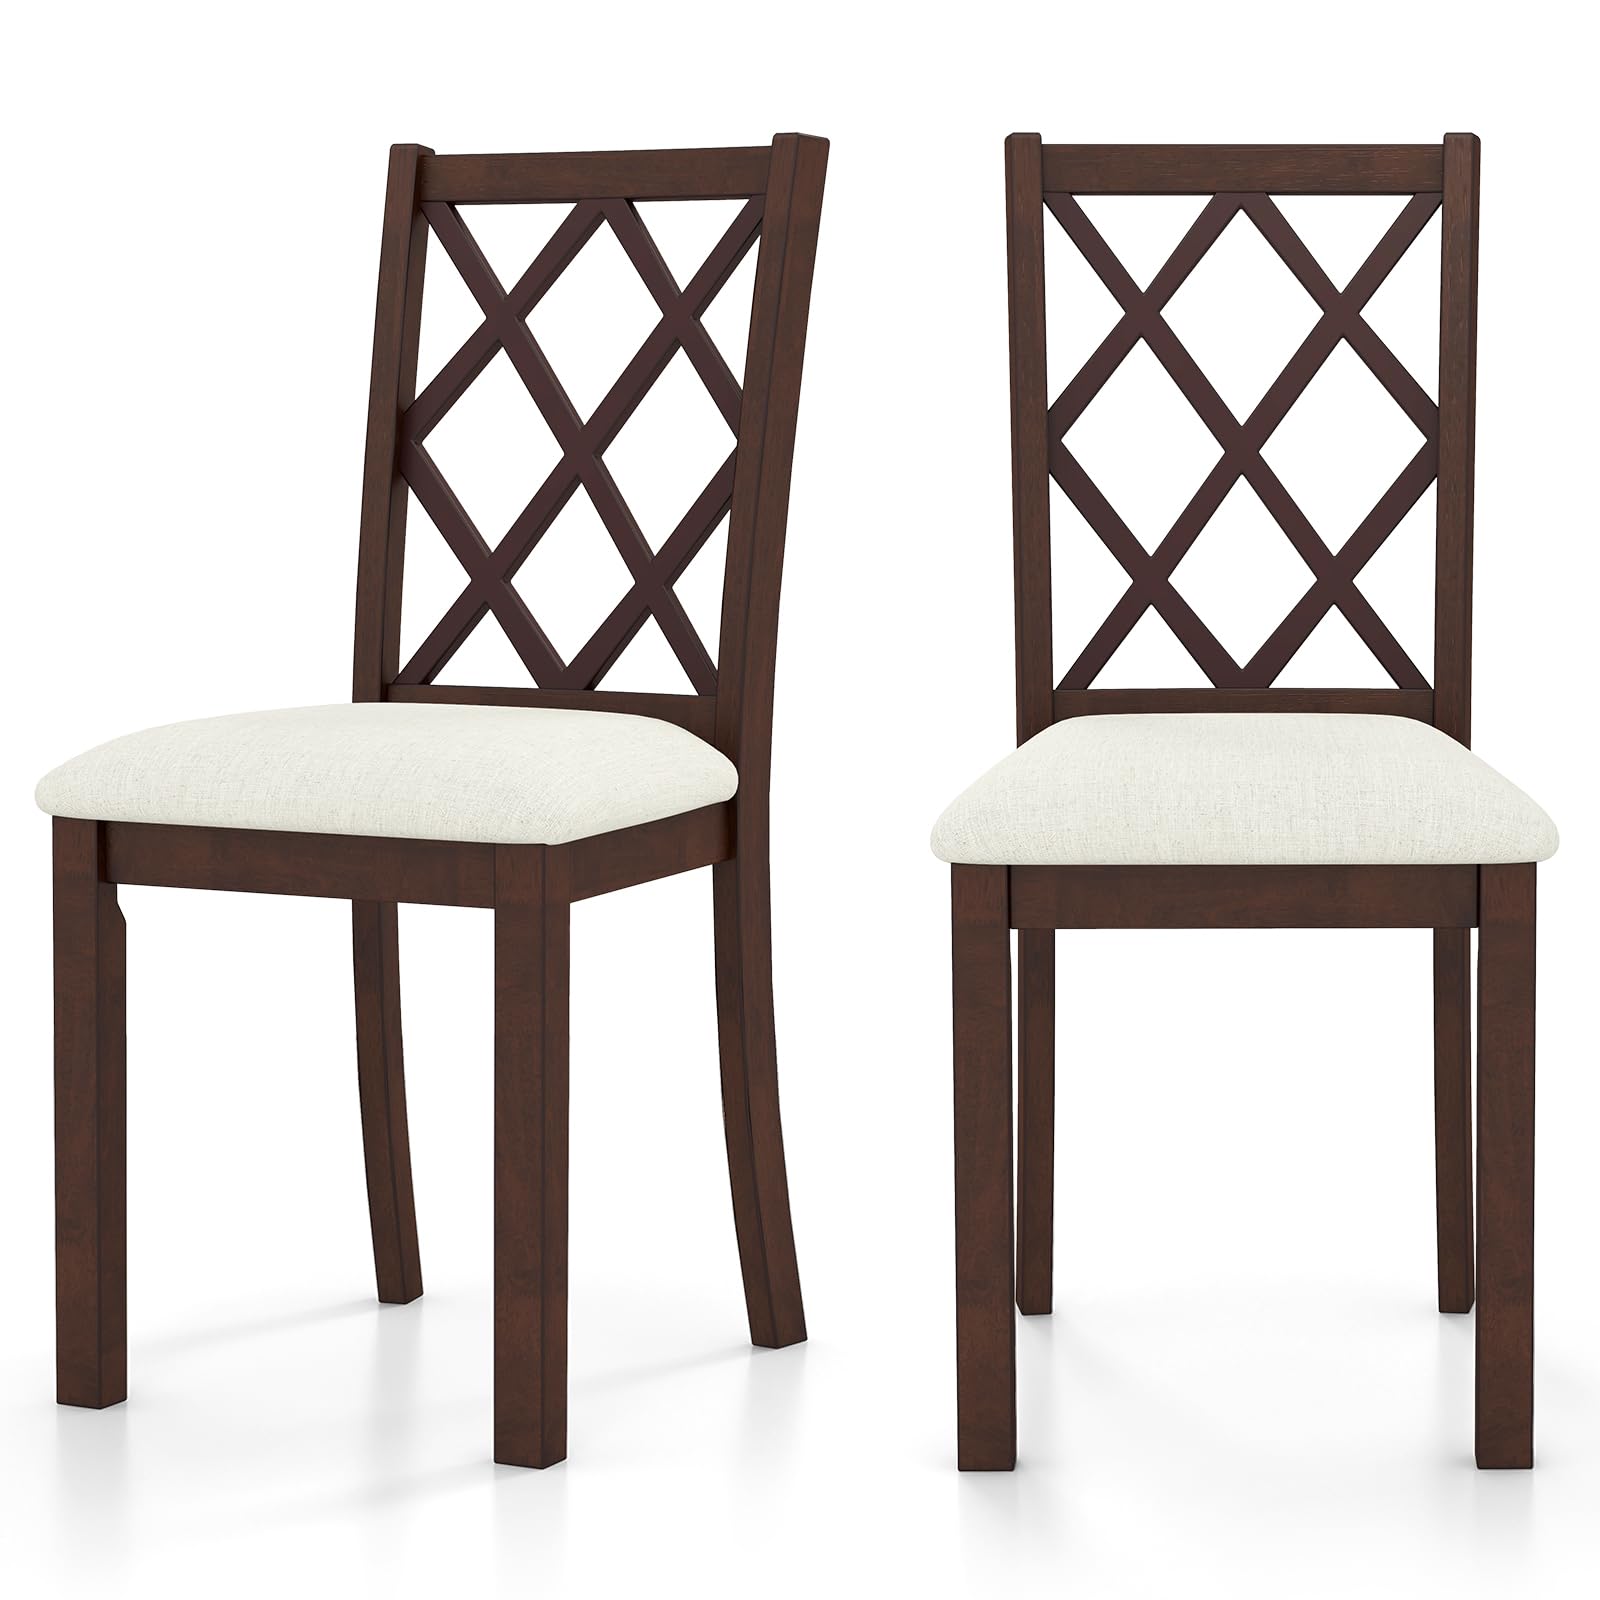 Giantex Wood Dining Chairs Set of 2, Farmhouse Kitchen Chair with Rubber Wood Legs, Max Load 400 Lbs